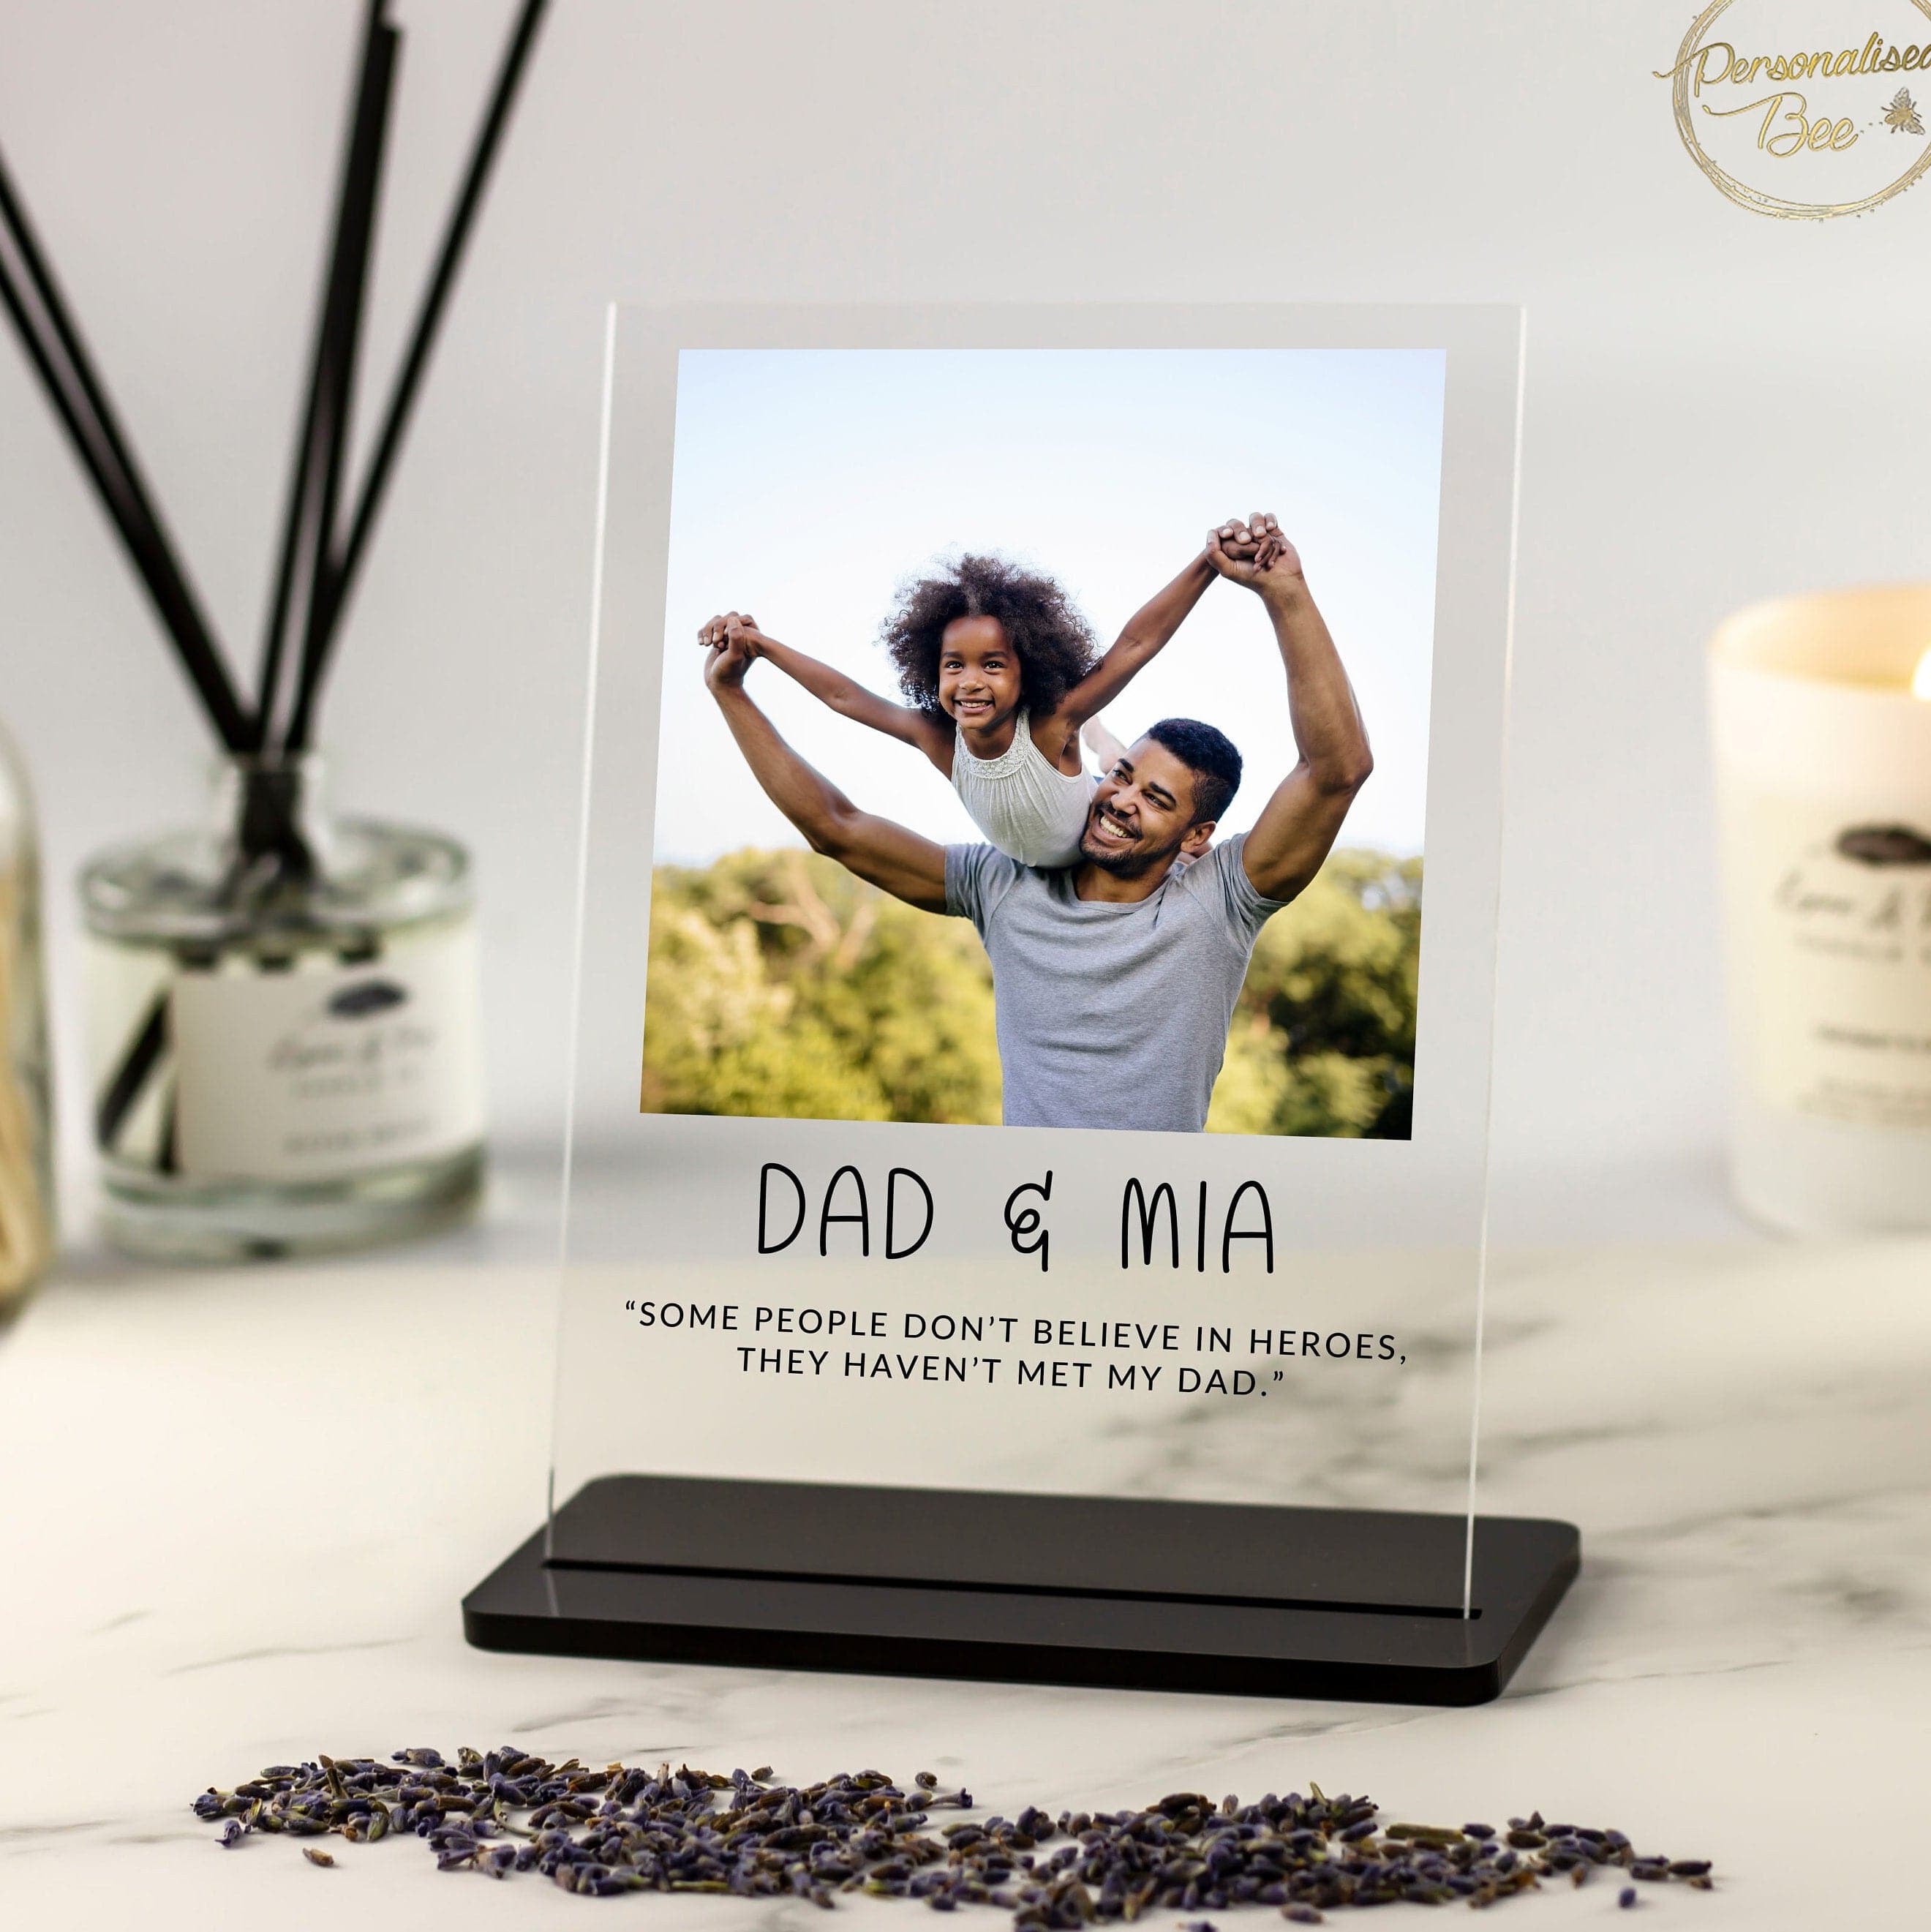 Gift for Dad, Personalised Gift for Dad, Dad Birthday Gift, Fathers Day Gift, New Dad Gift, Gift from Kids, Bonus Dad, Acrylic Photo Plaque